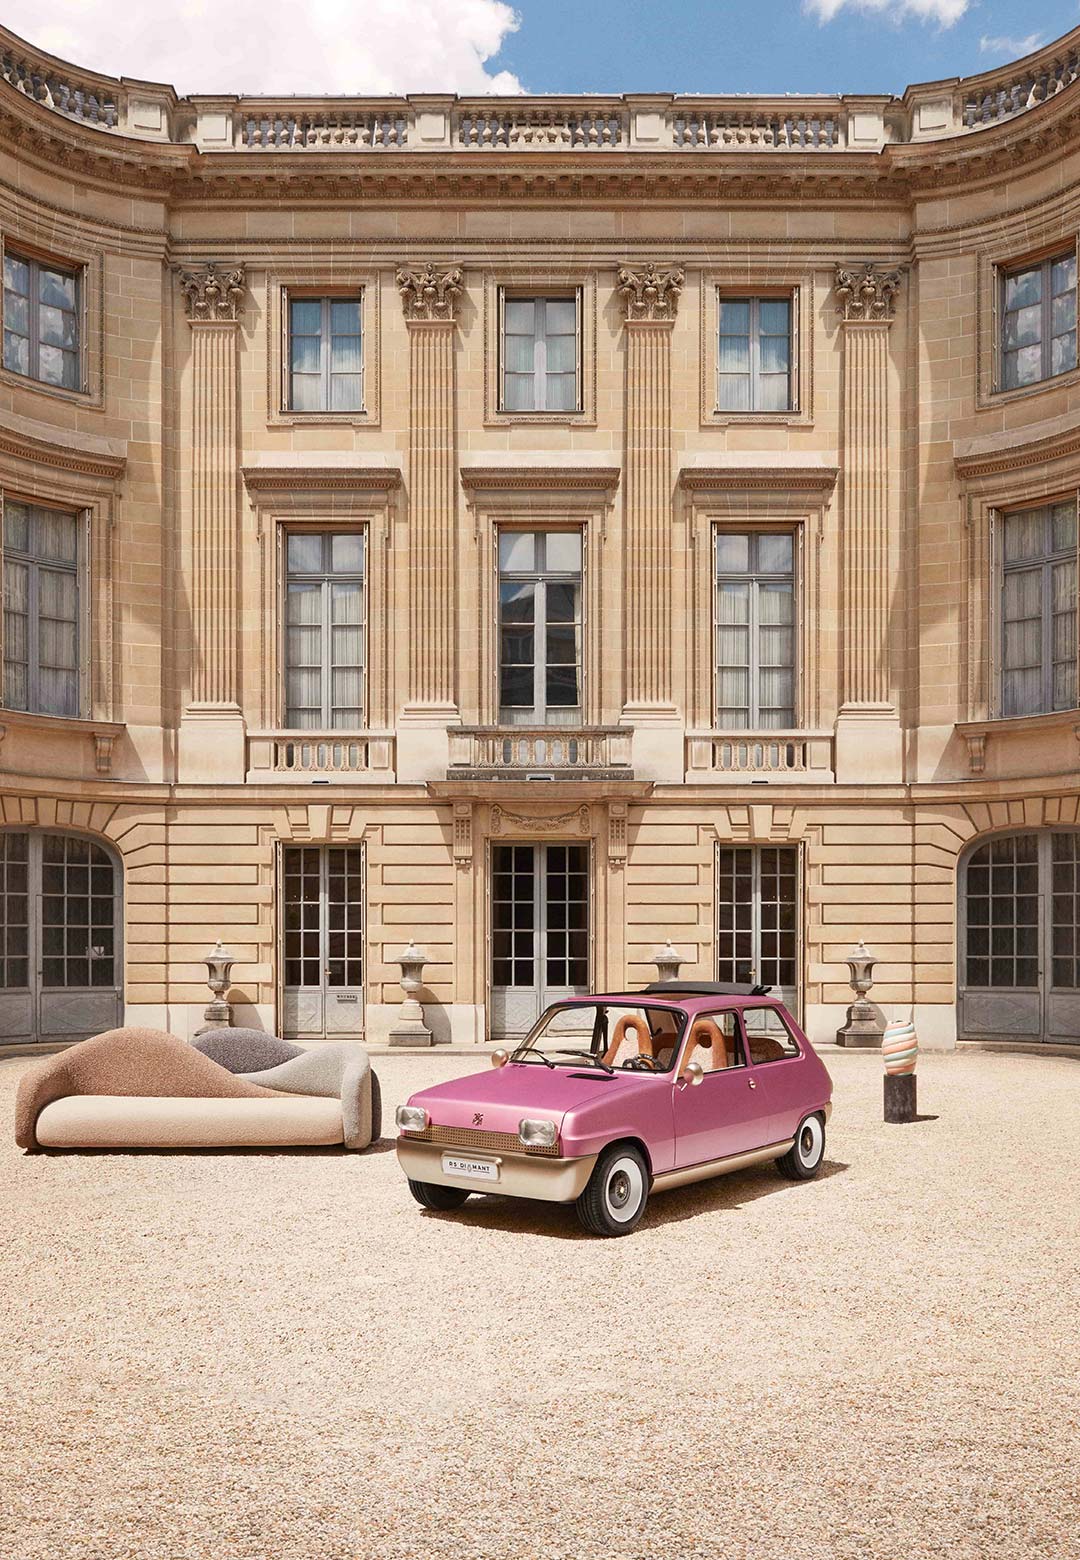 Pierre Gonalons designs Renault 5 Diamant to celebrate the iconic model’s 50th anniversary